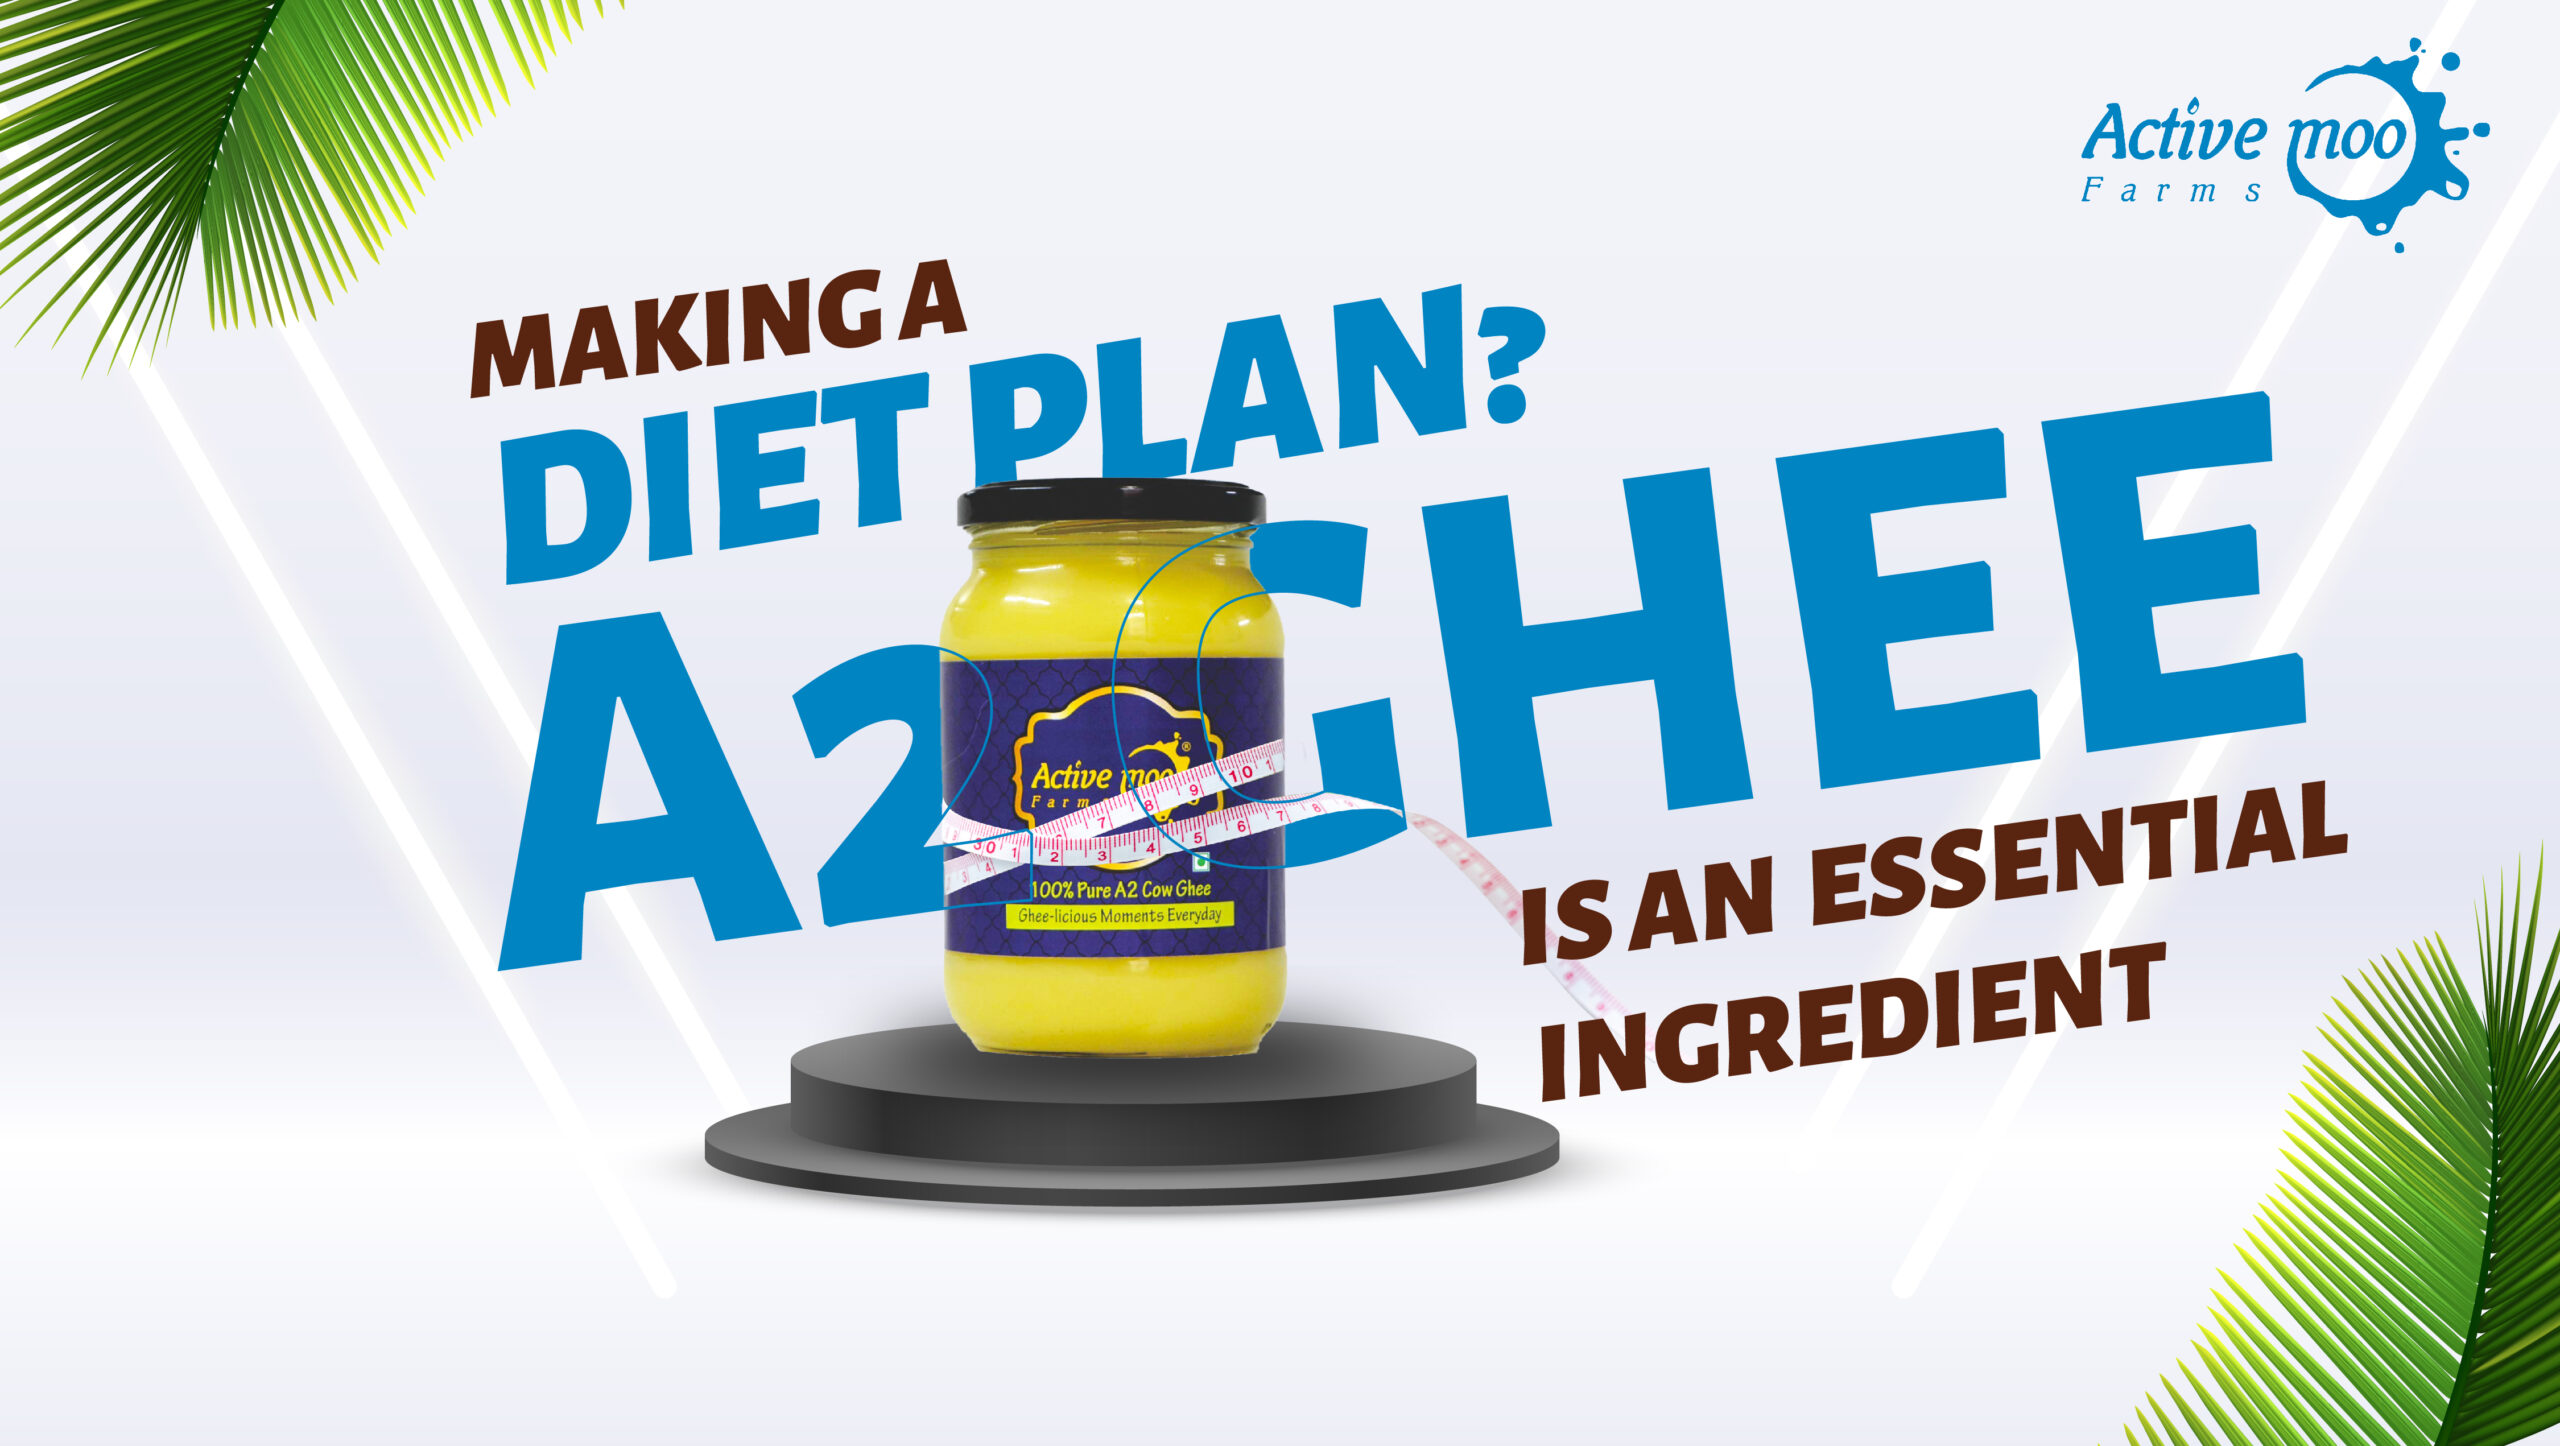 diet plan with A2 ghee and a jar of A2 ghee